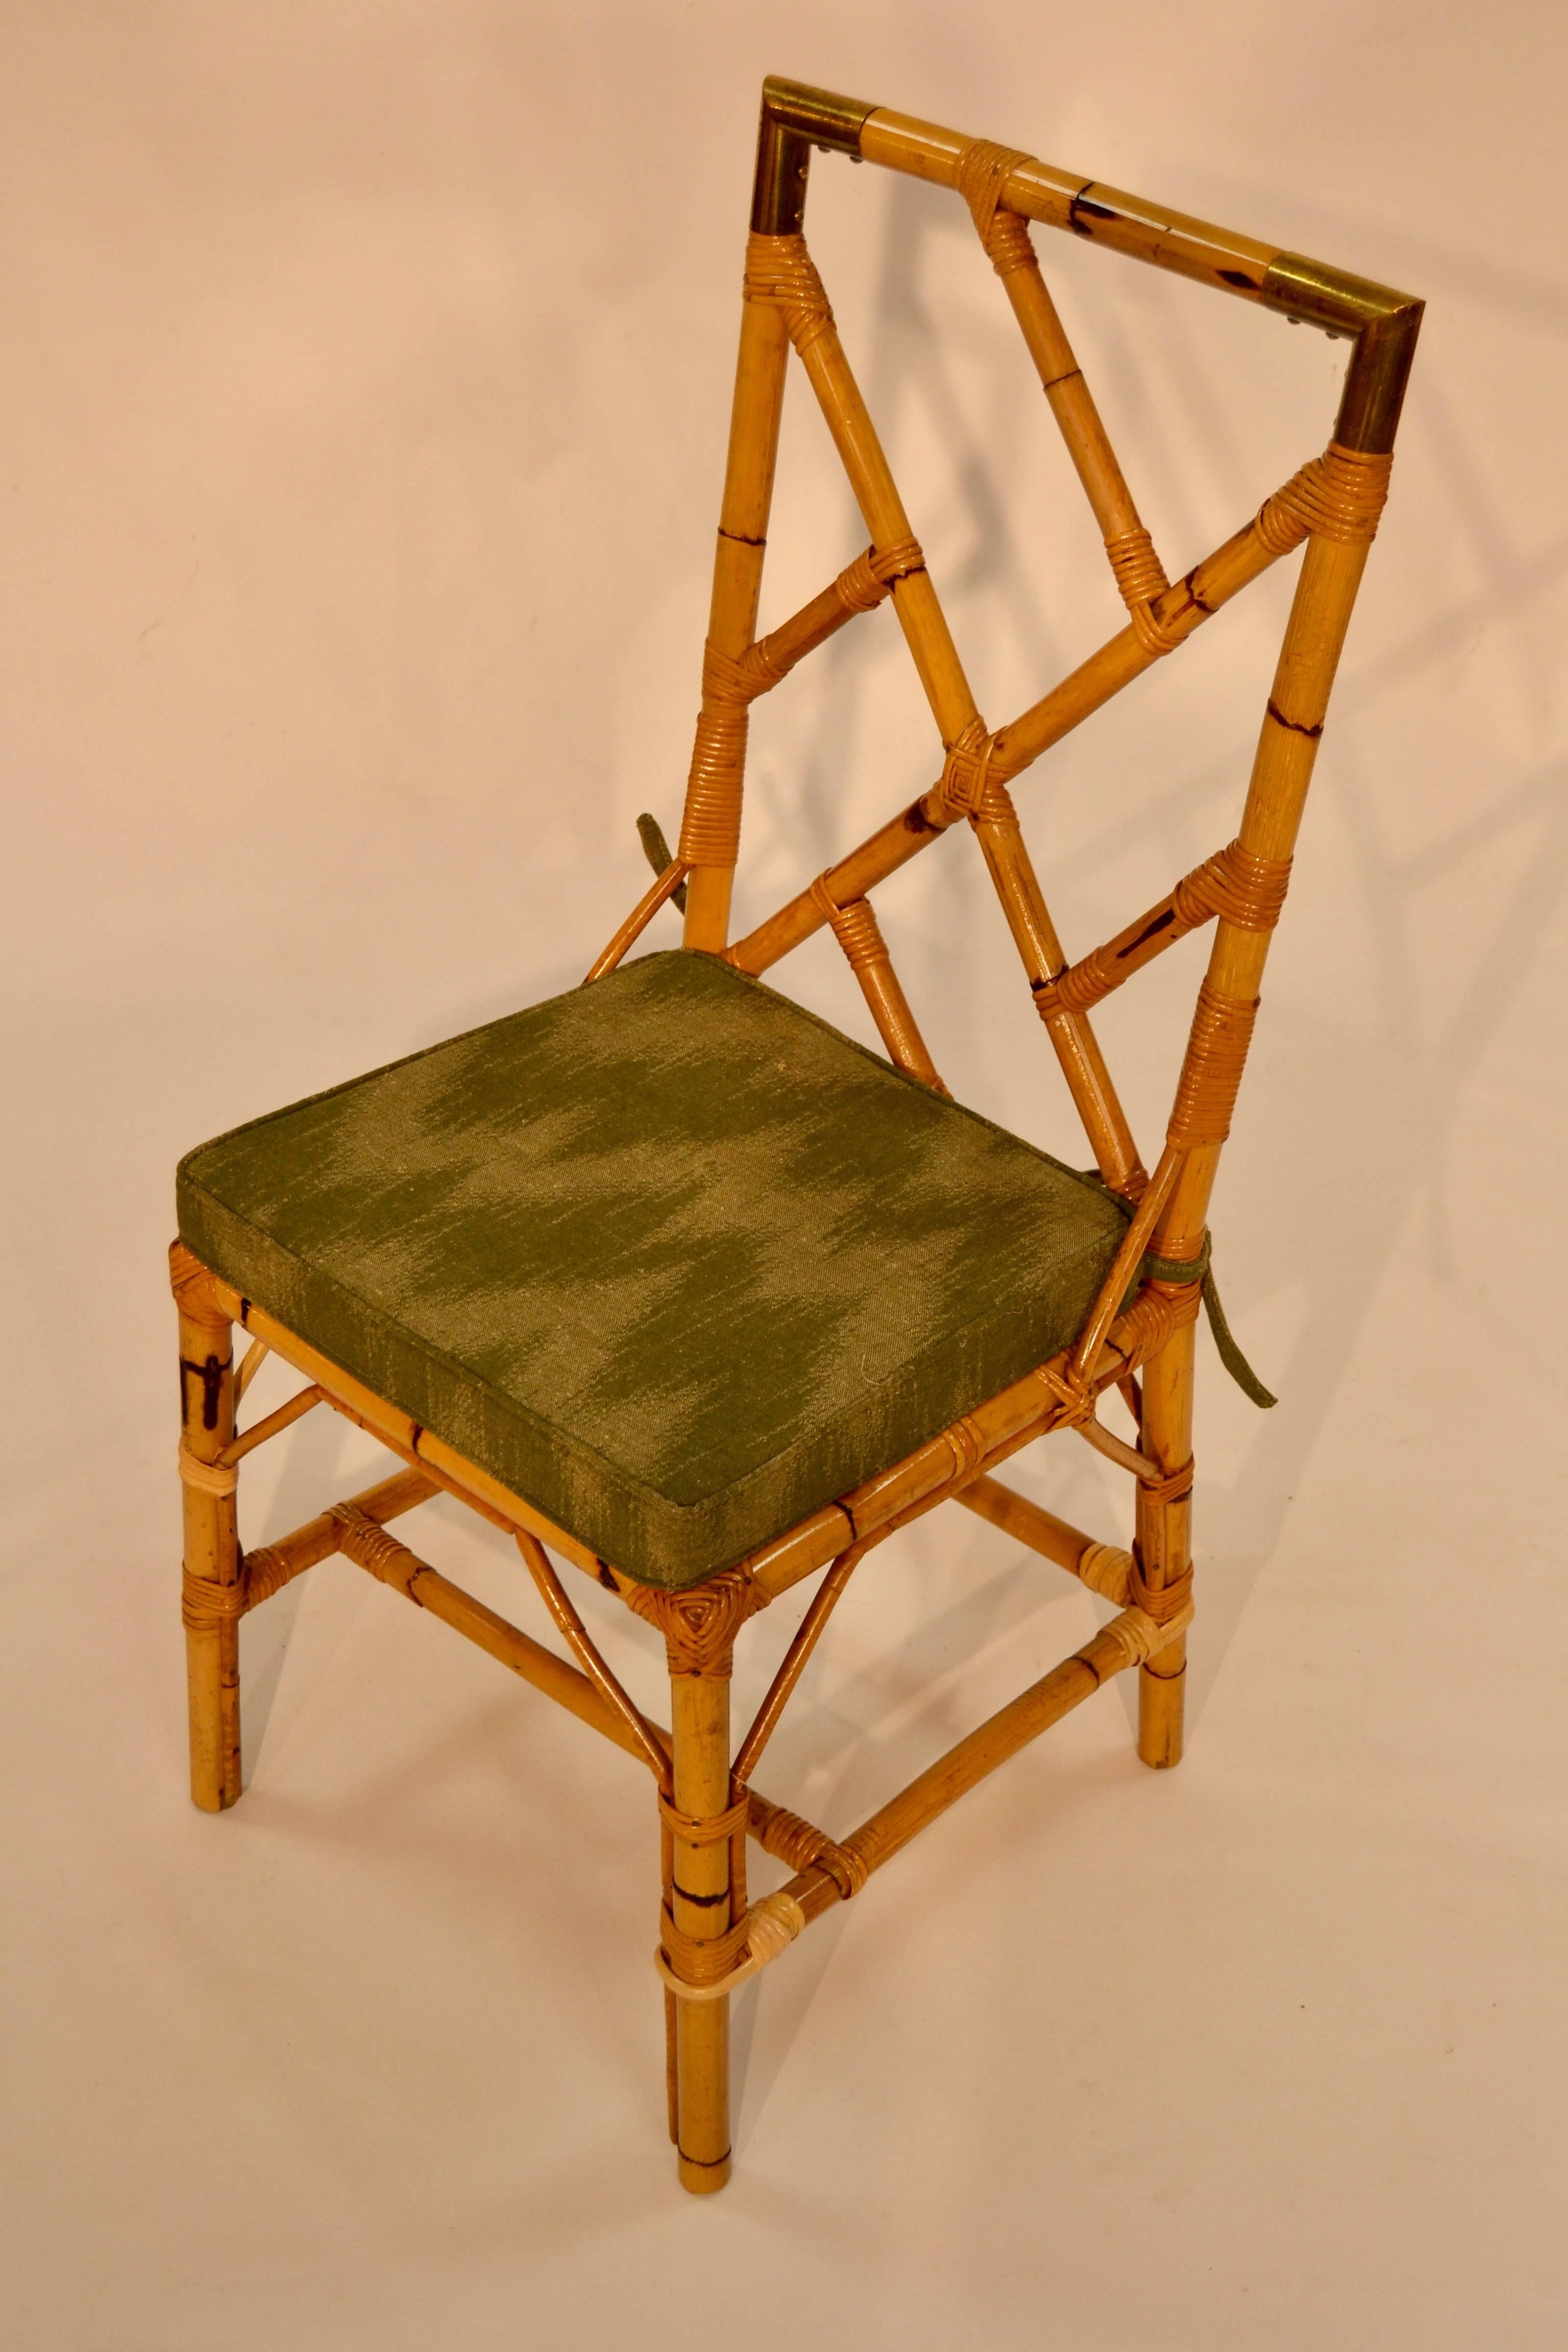 Four Chairs in Bamboo and Brass Details 3